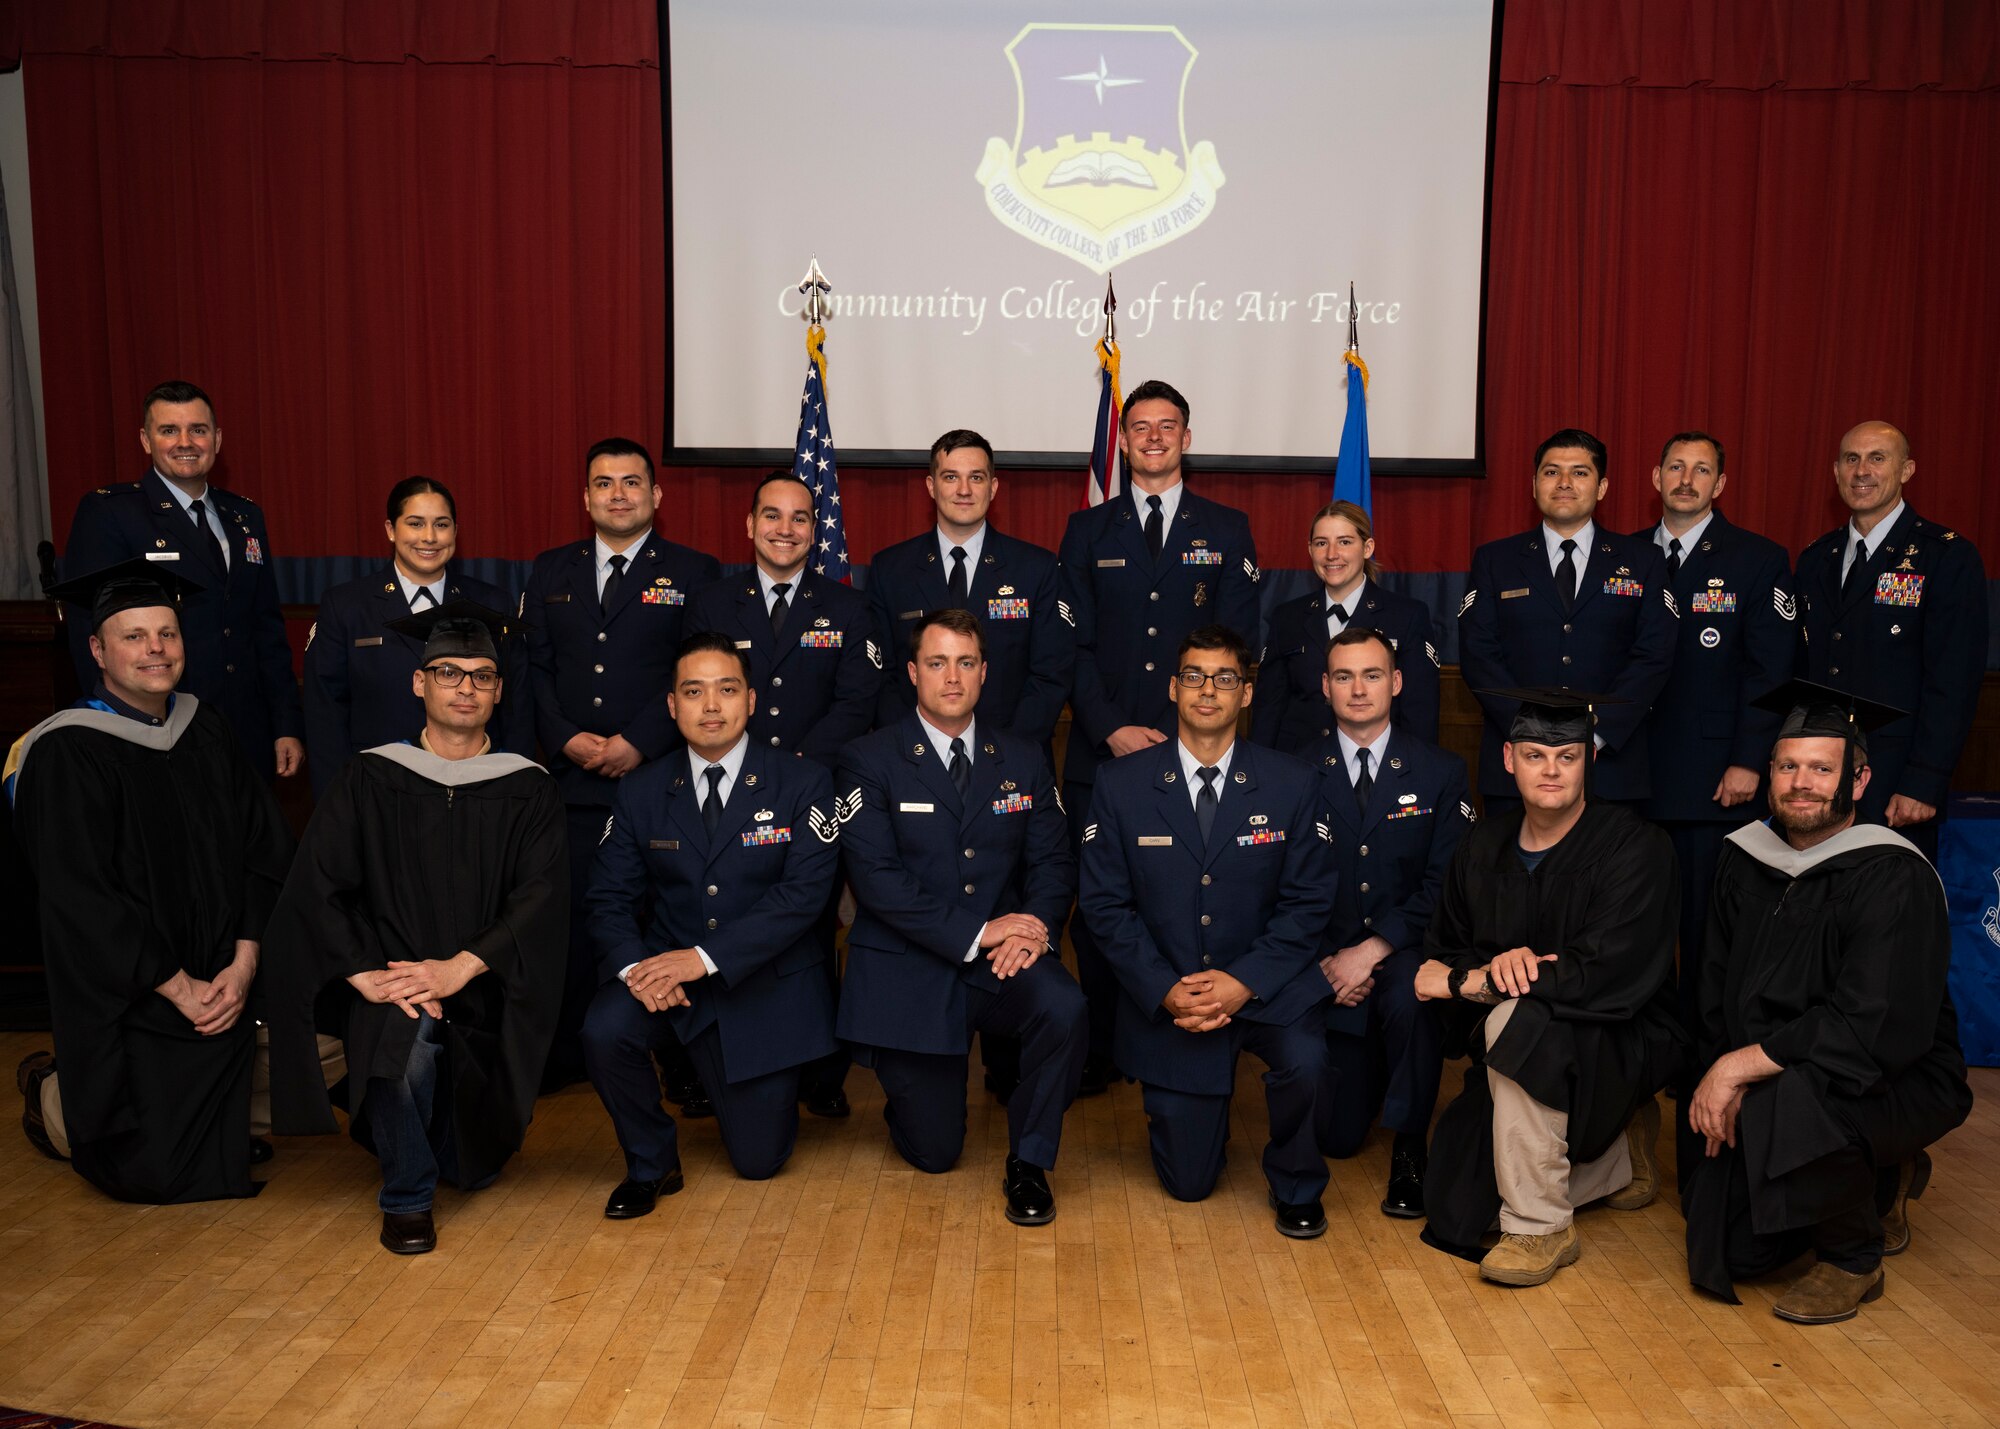 The CCAF provides a path to higher learning for those with a calling to serve.